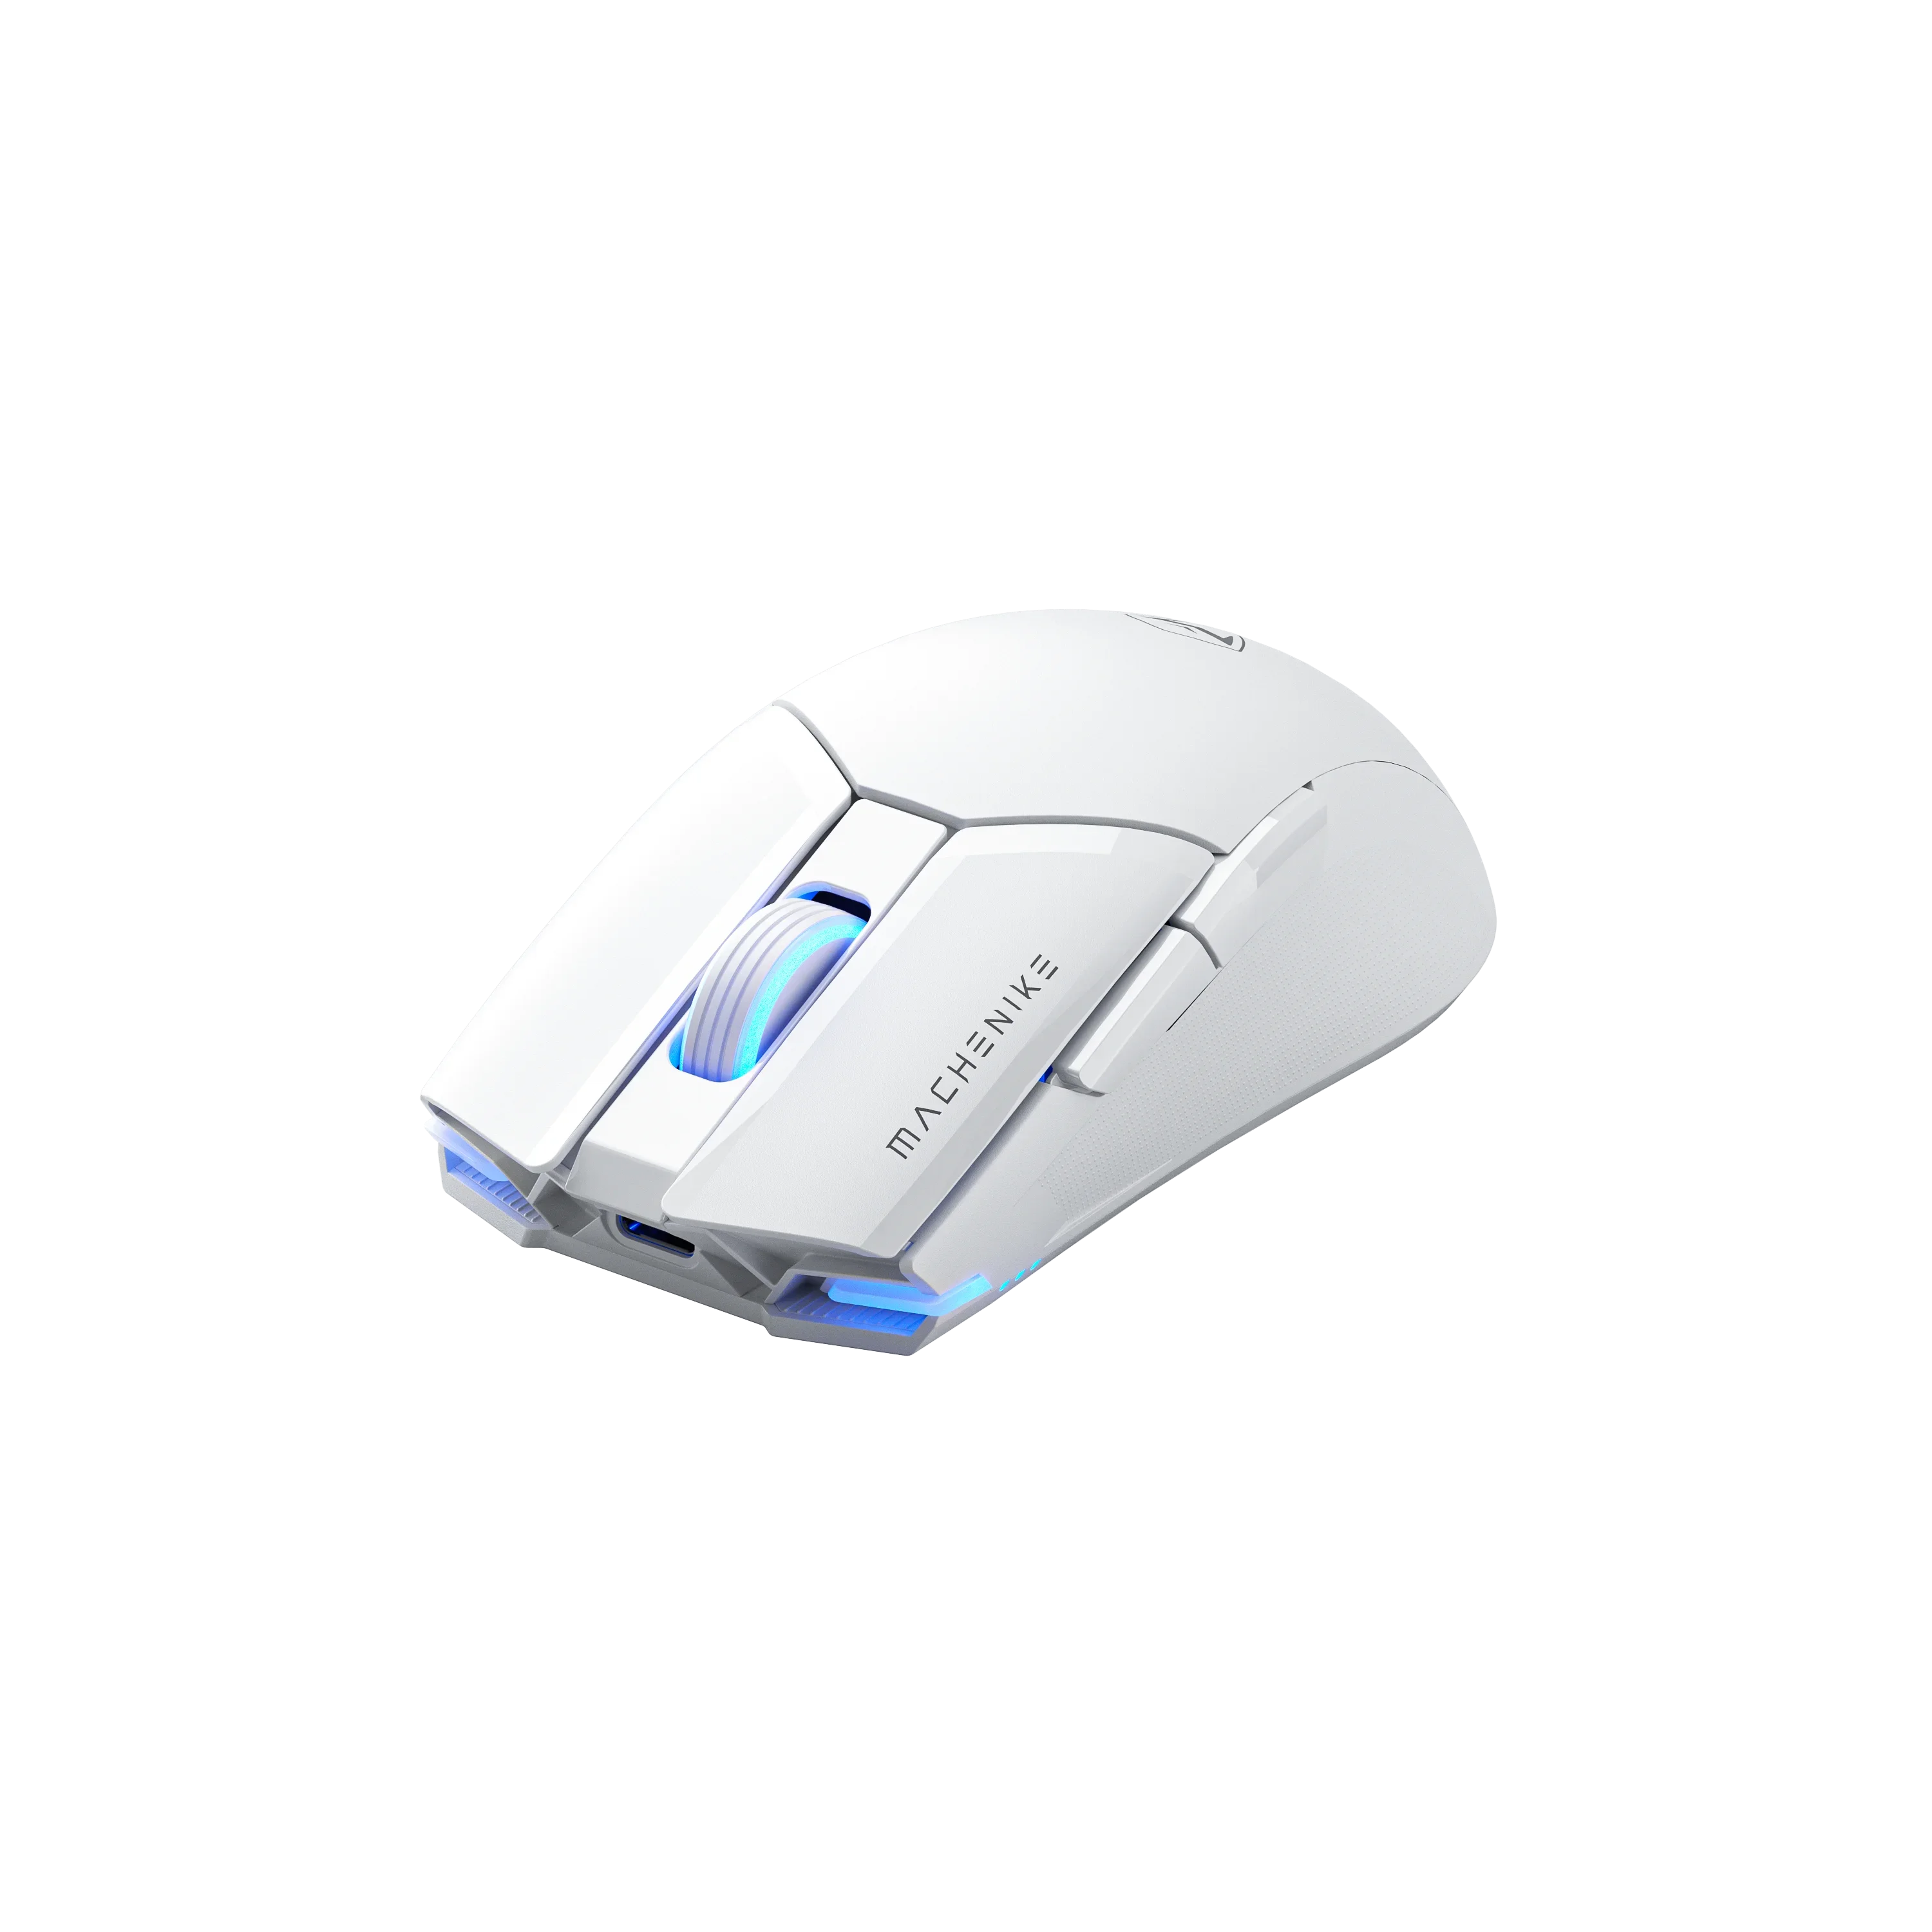 M7 Pro Gaming Mouse USB Wired 2.4GHz Wireless Mouse 26000DPI 650IPS 7 Button 74g RGB for Laptop PC Gamer - Farefe